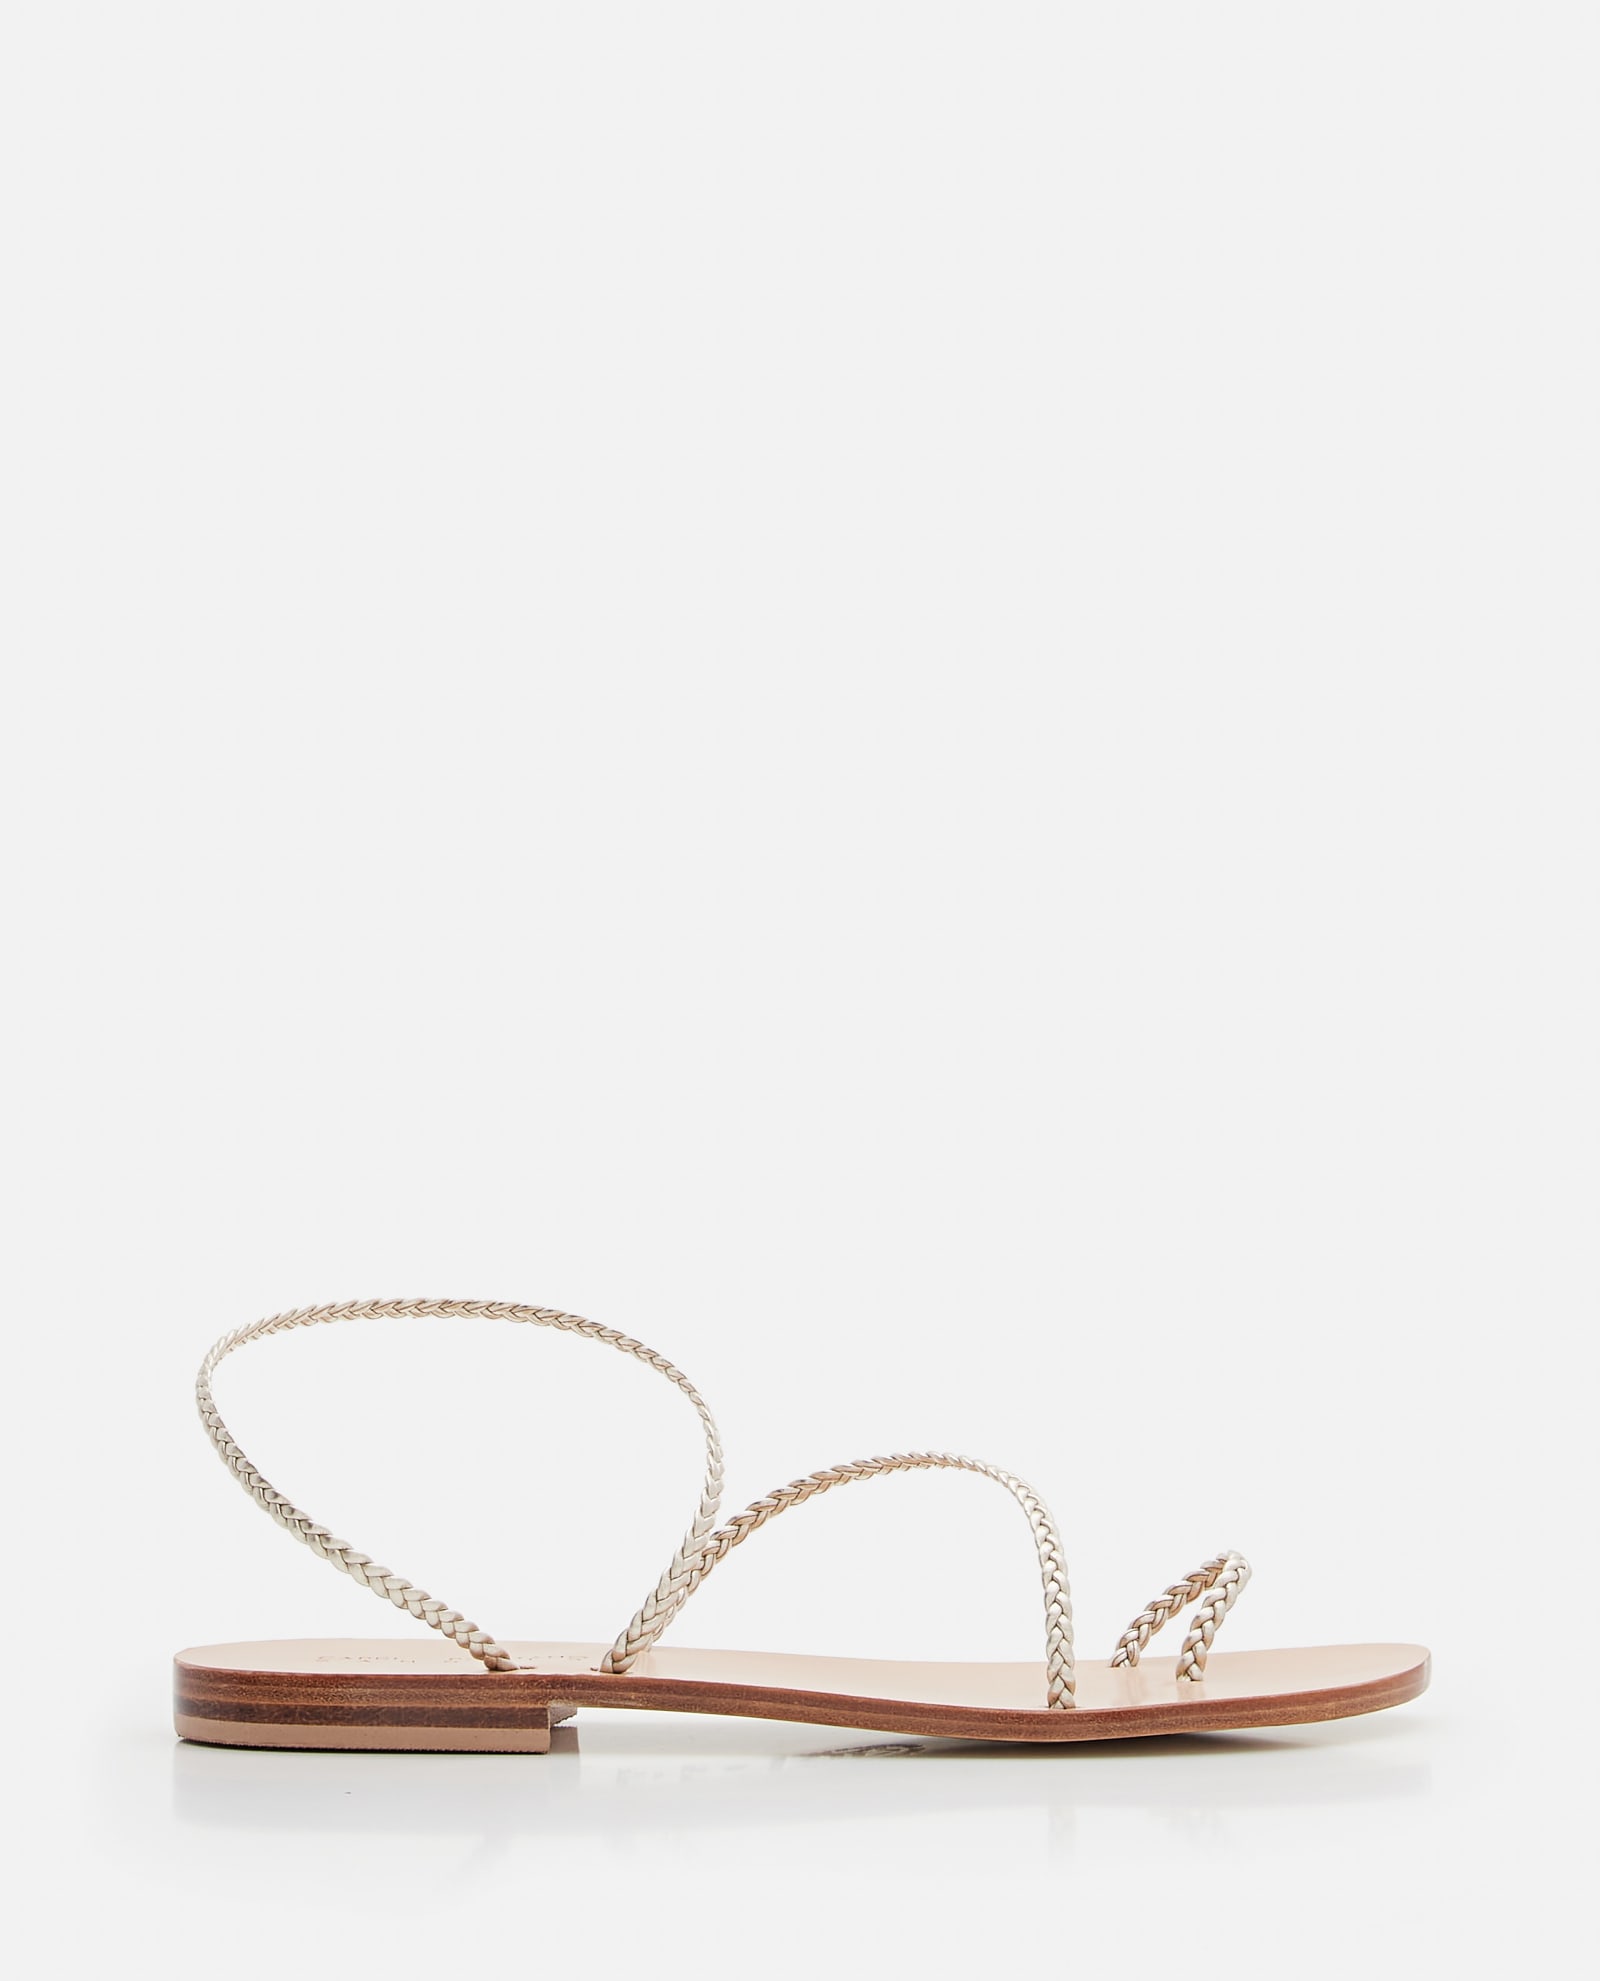 Caliope Braid Leather Flat Sandals